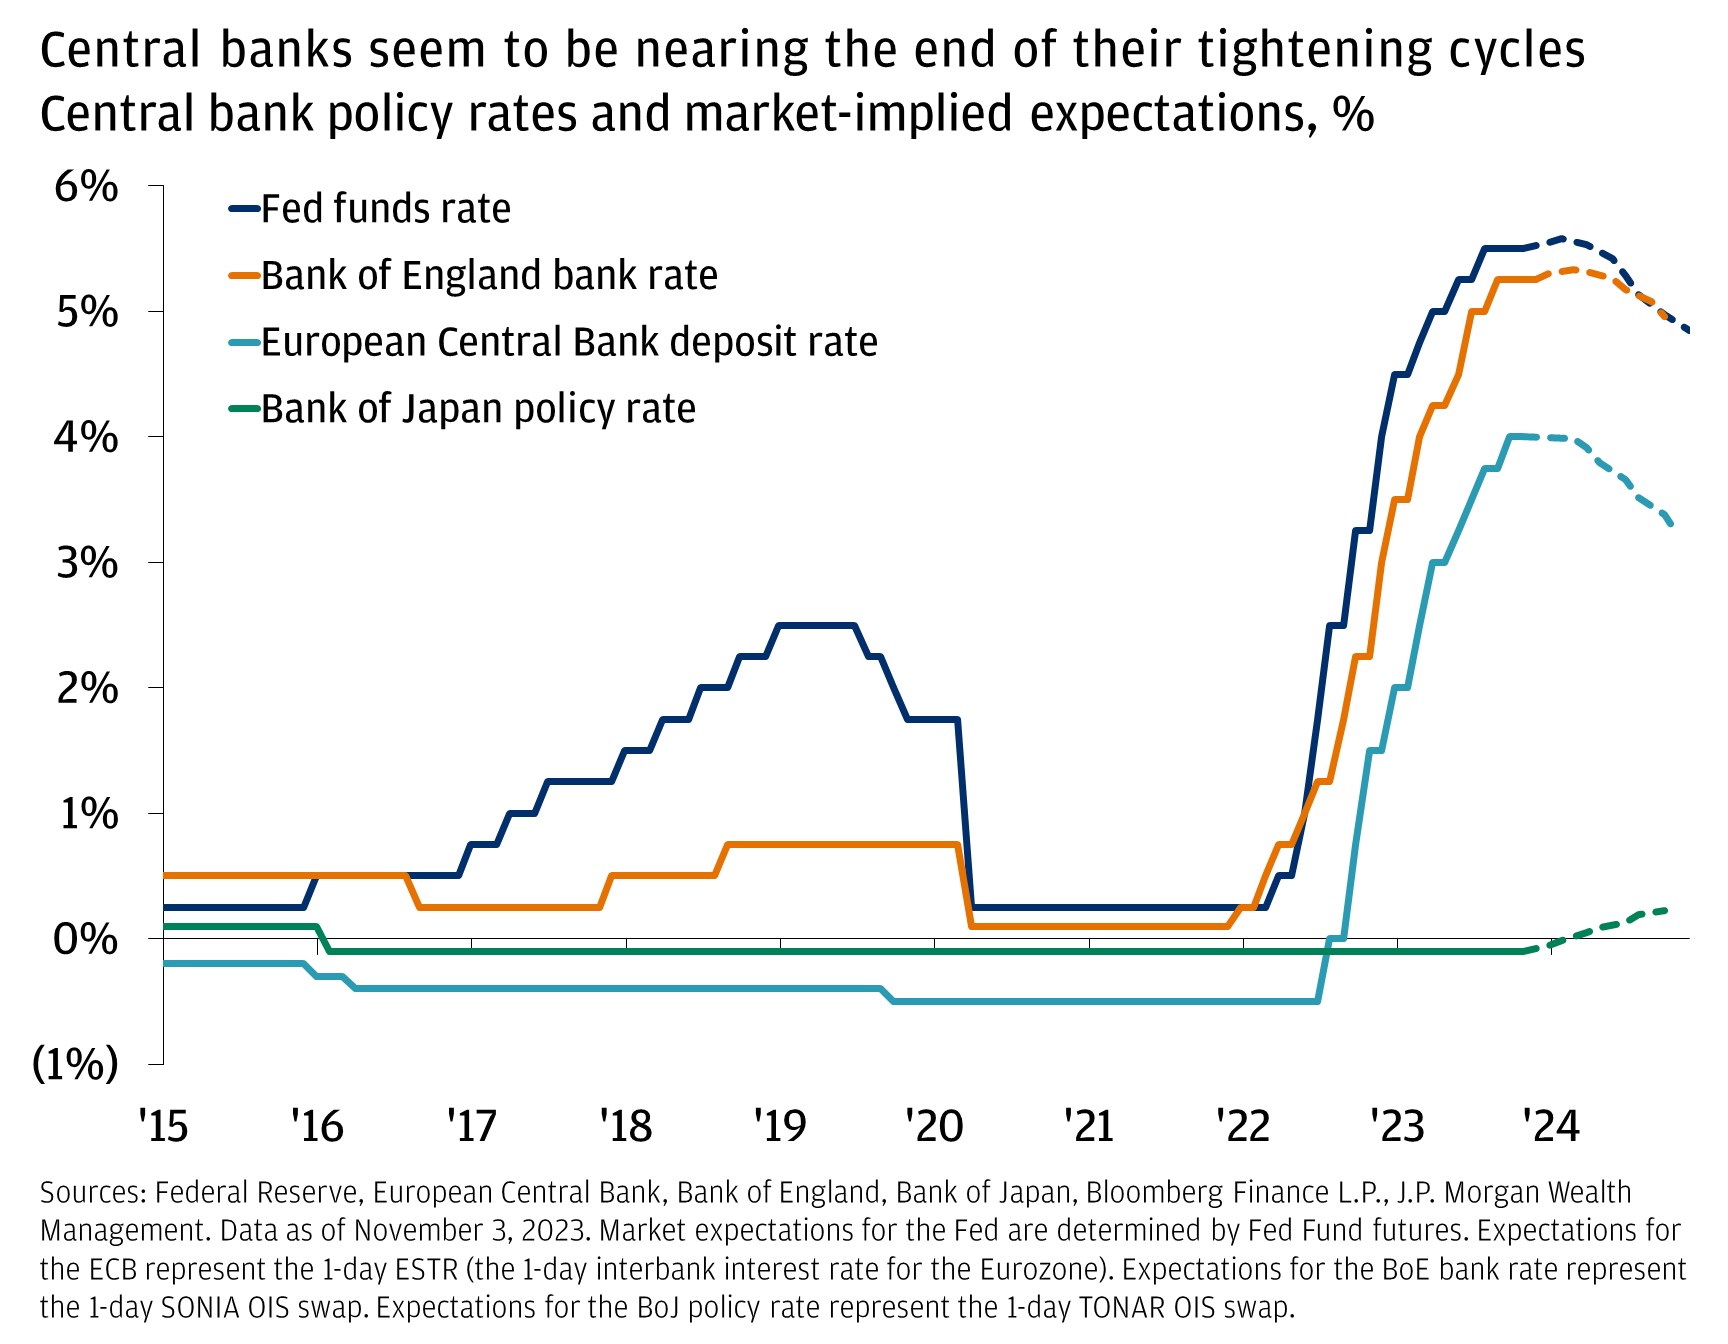 Central banks seem to be nearing the end of their tightening cycles